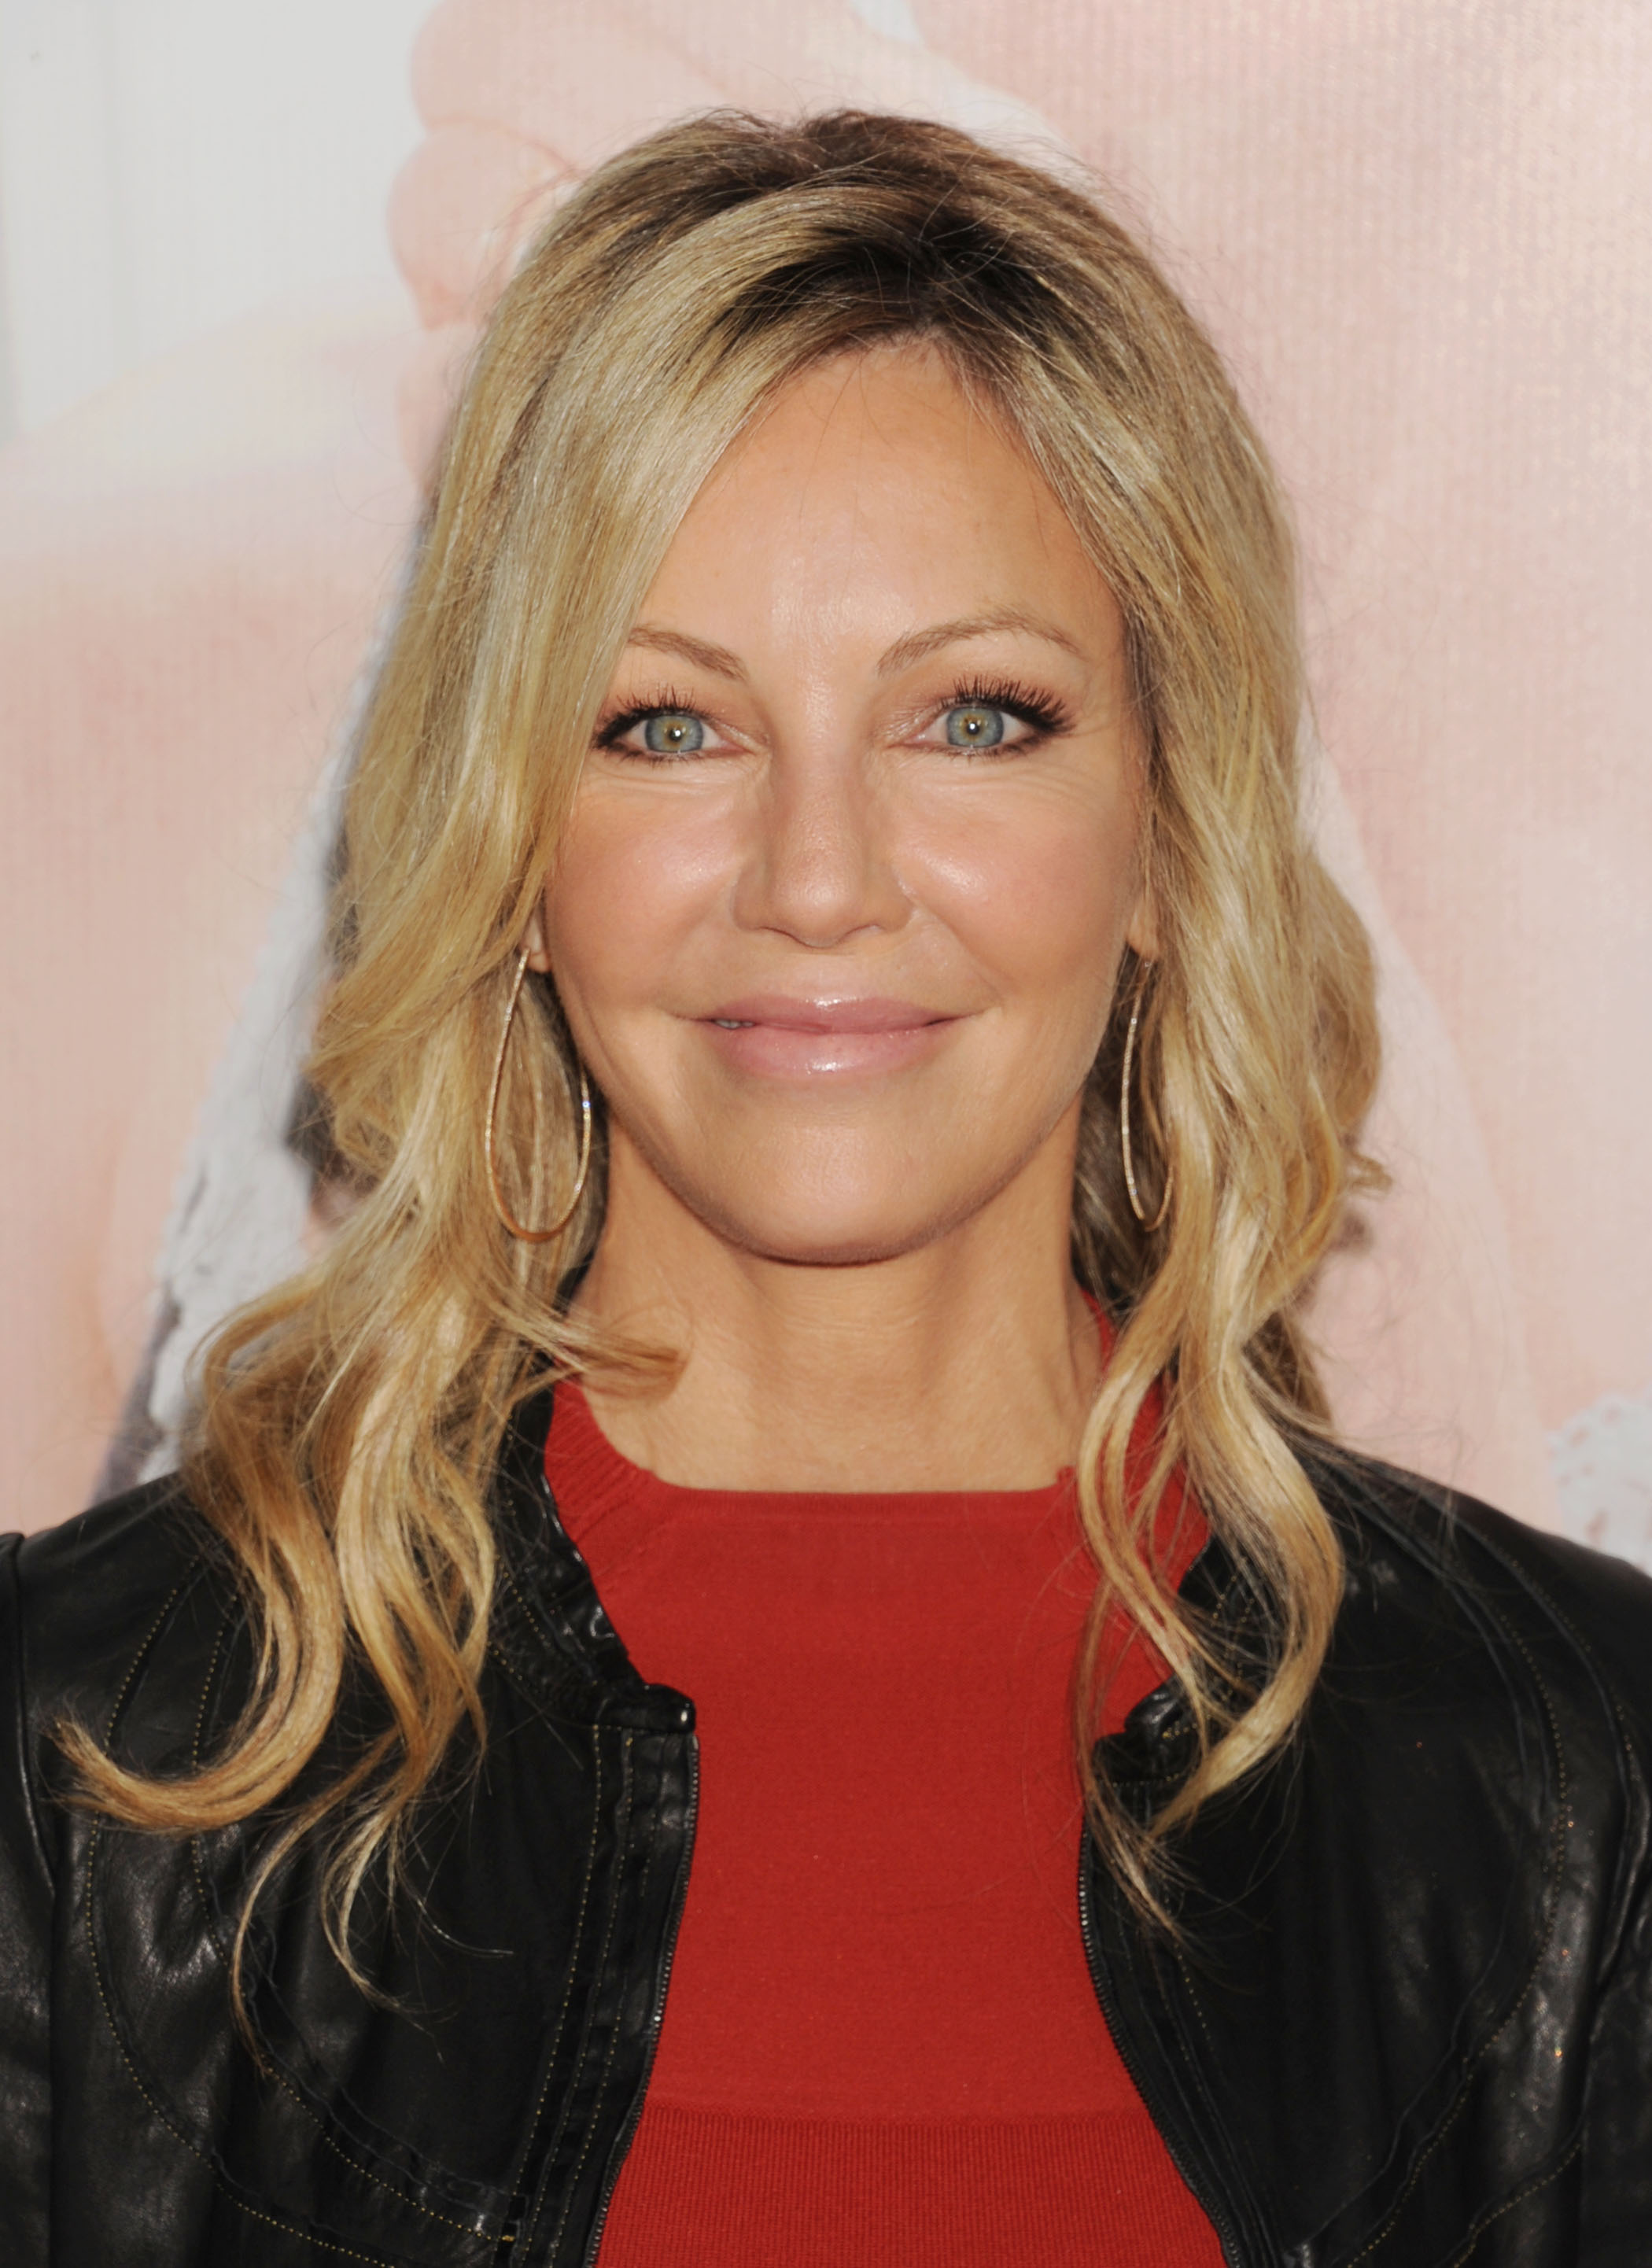 Heather Locklear on December 12, 2012 in Hollywood, California | Source: Getty Images